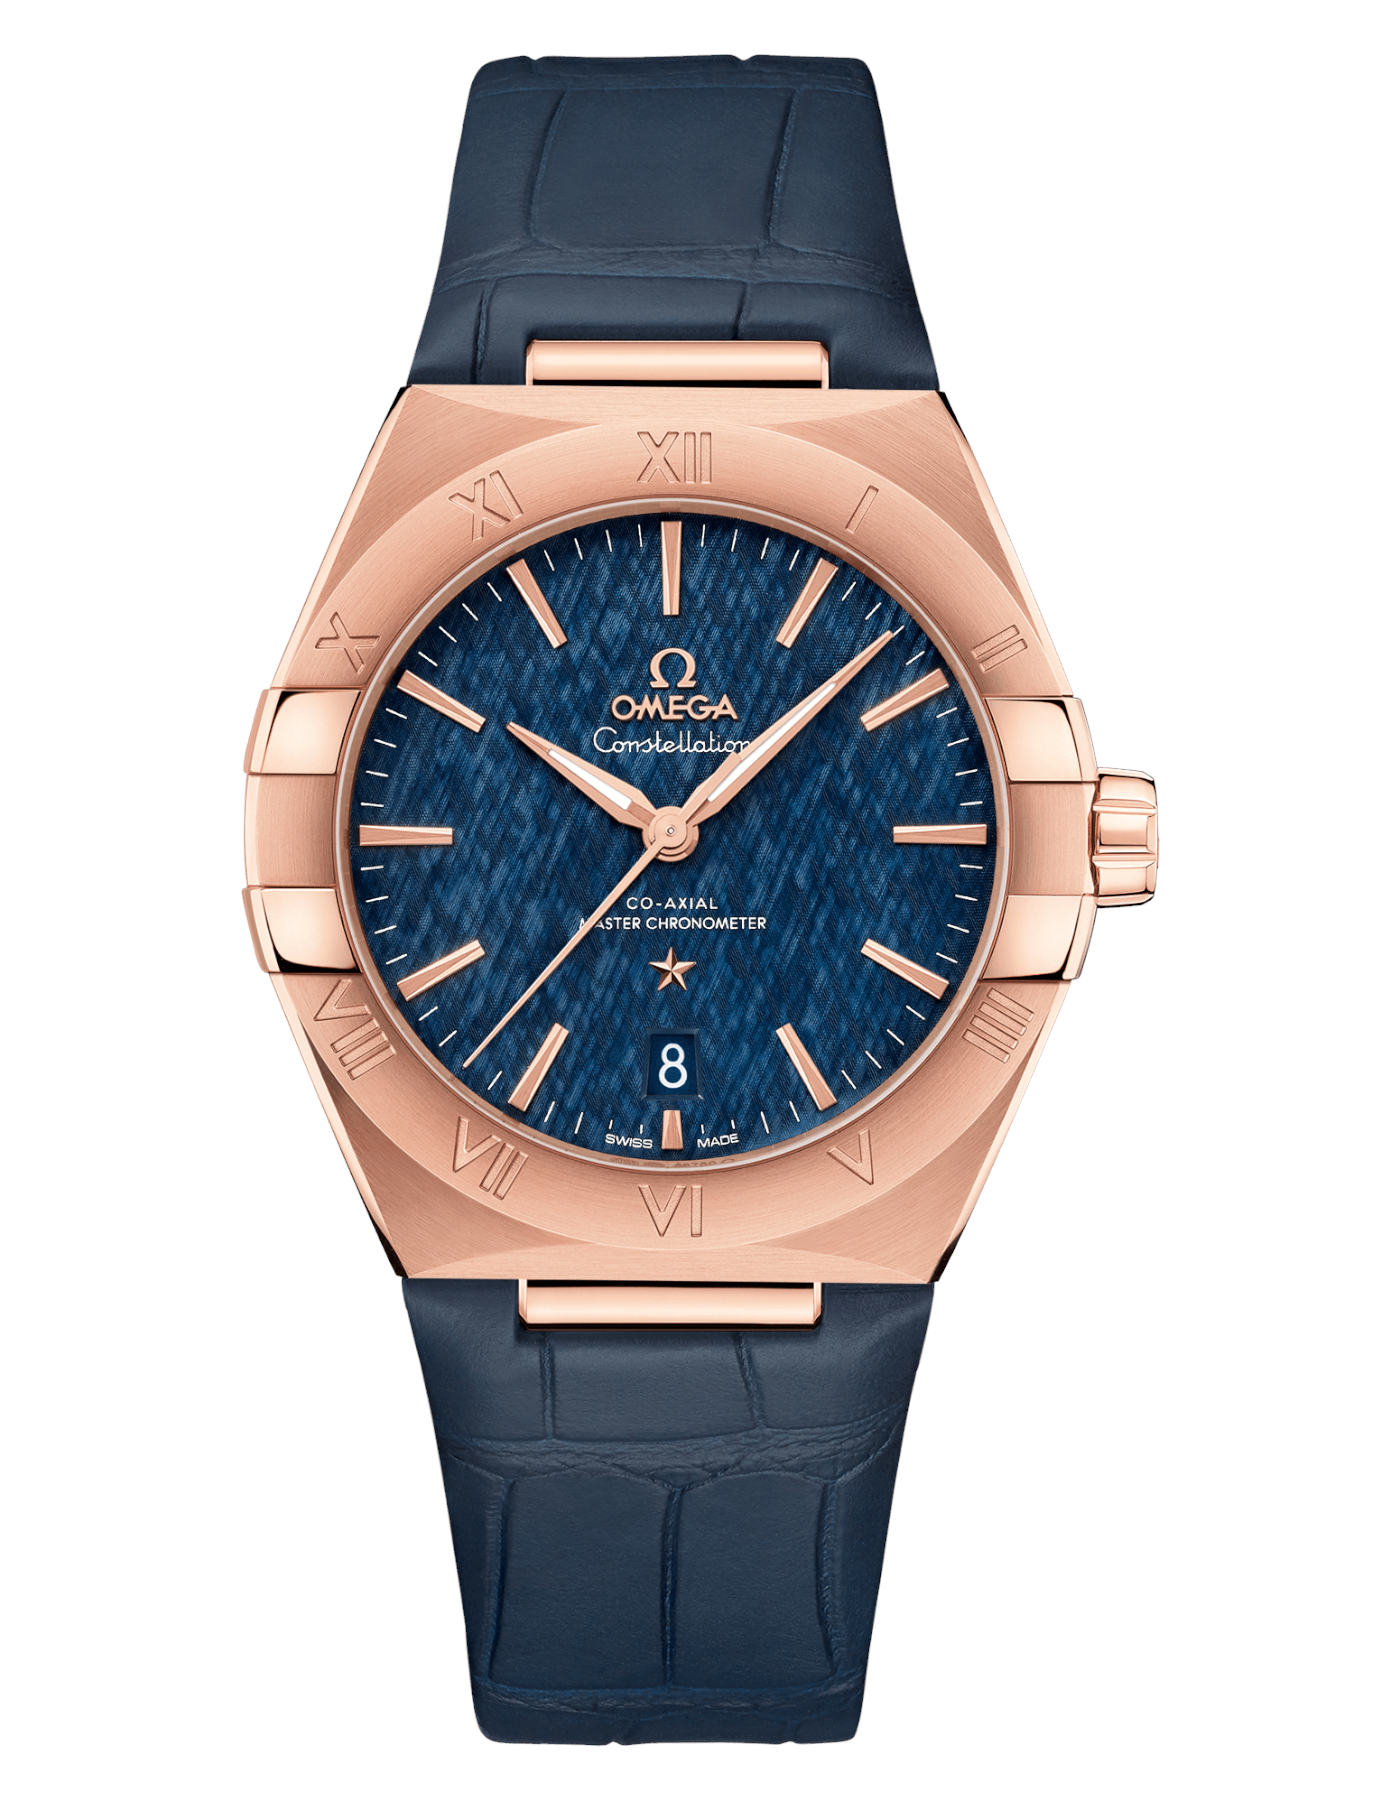 CONSTELLATION CO‑AXIAL MASTER CHRONOMETER 39 MM